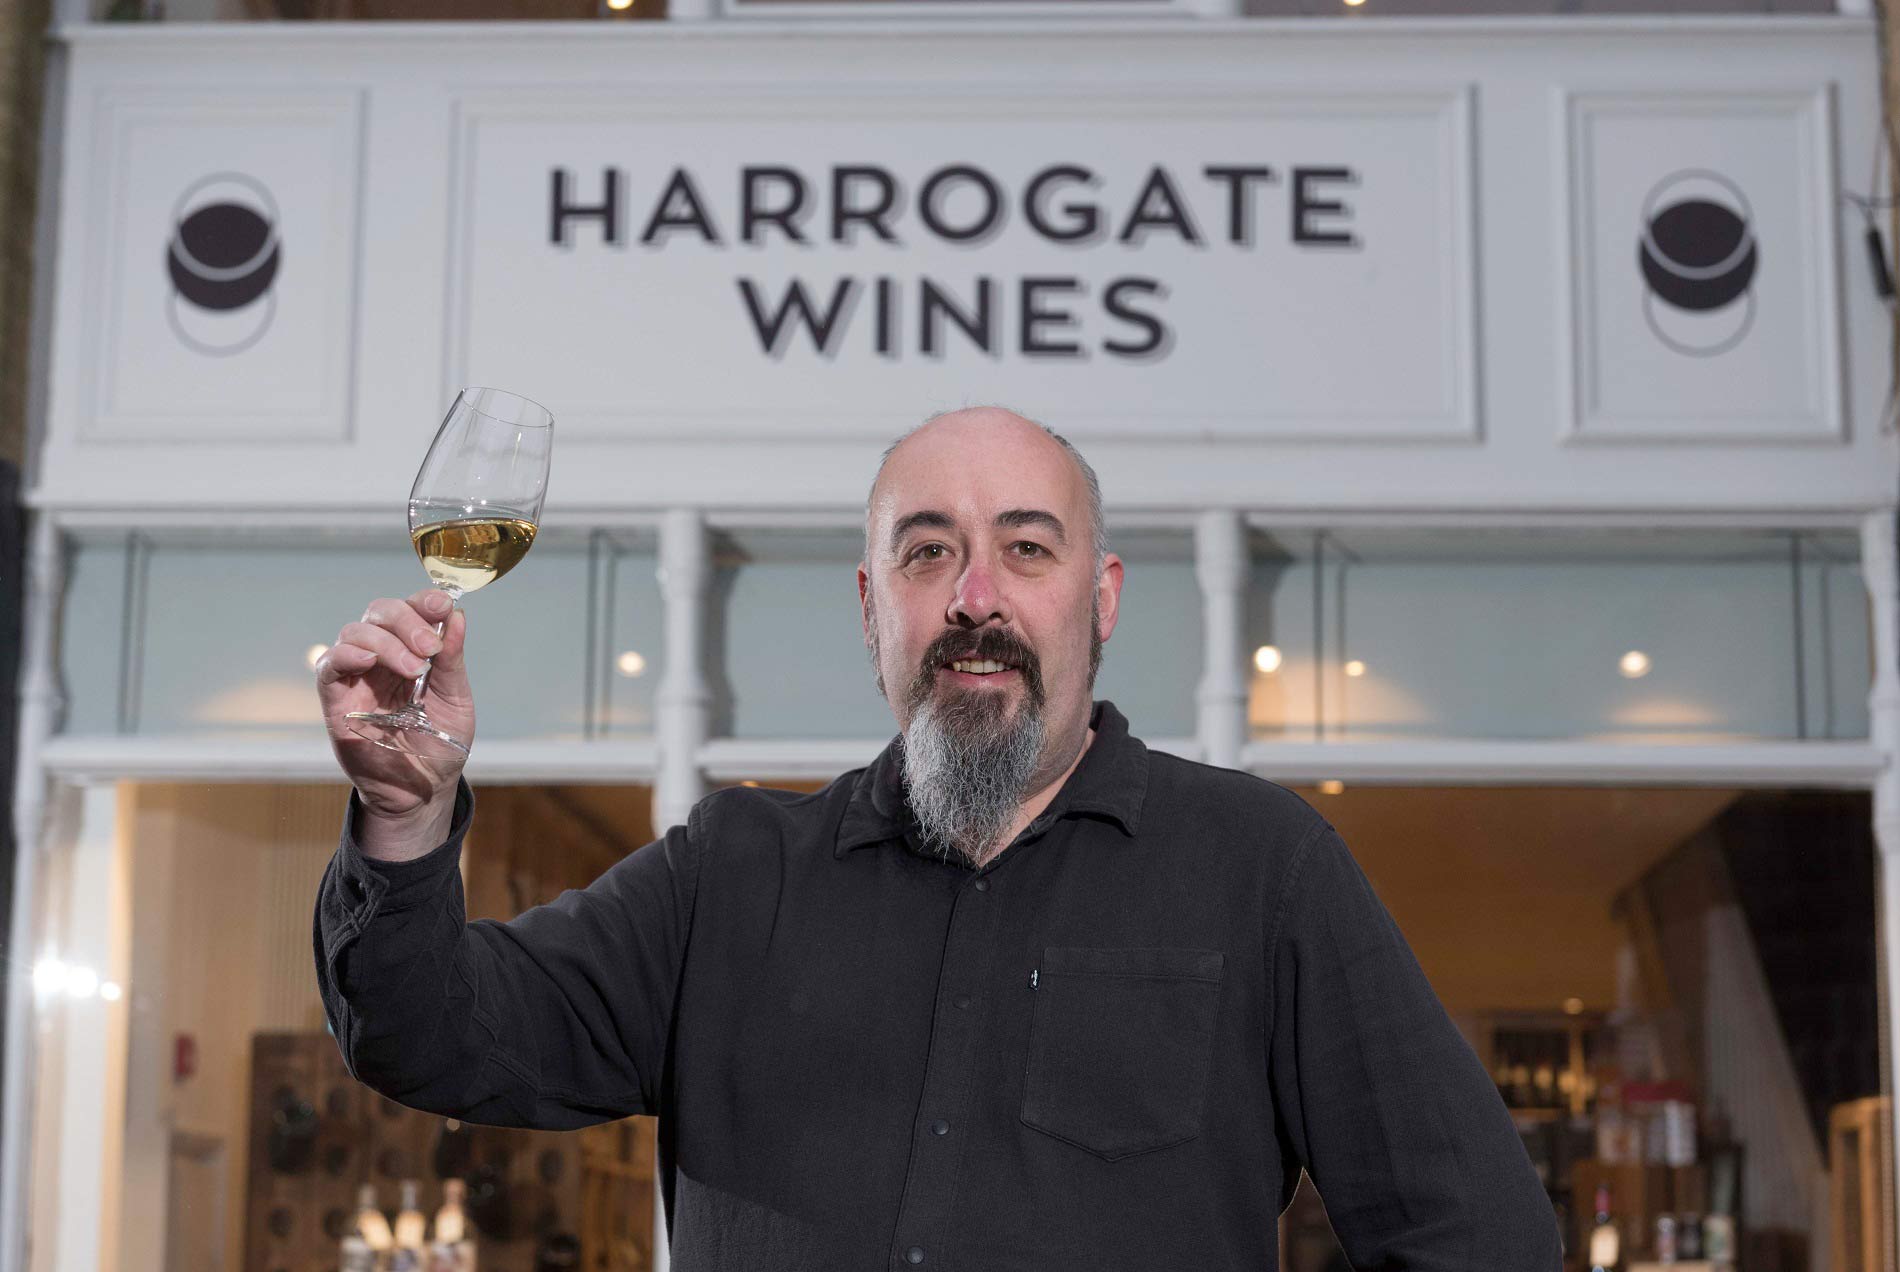 Andy Langshaw who owns Harrogate Wines